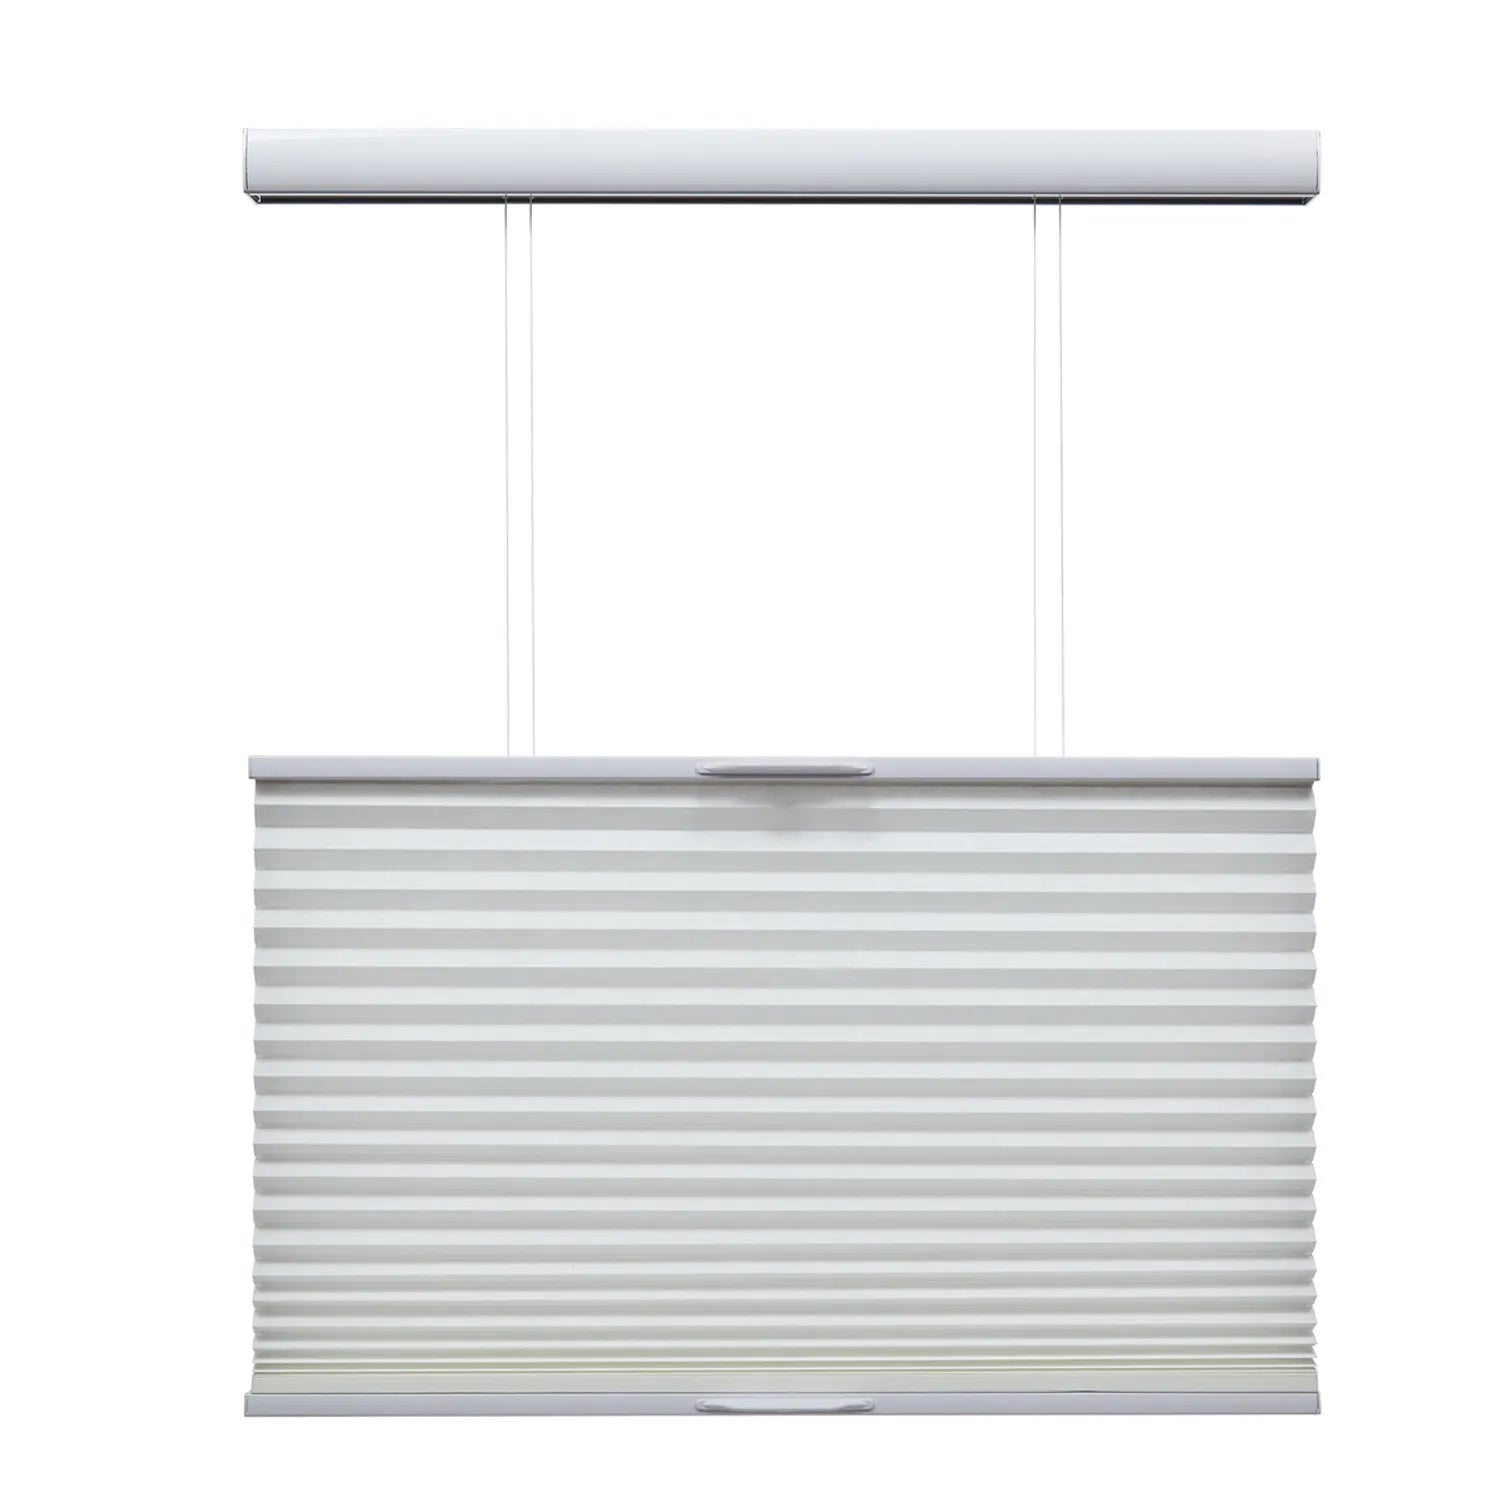 Cordless top-down bottom-up honeycomb shade in light gray, offering adjustable lighting and privacy